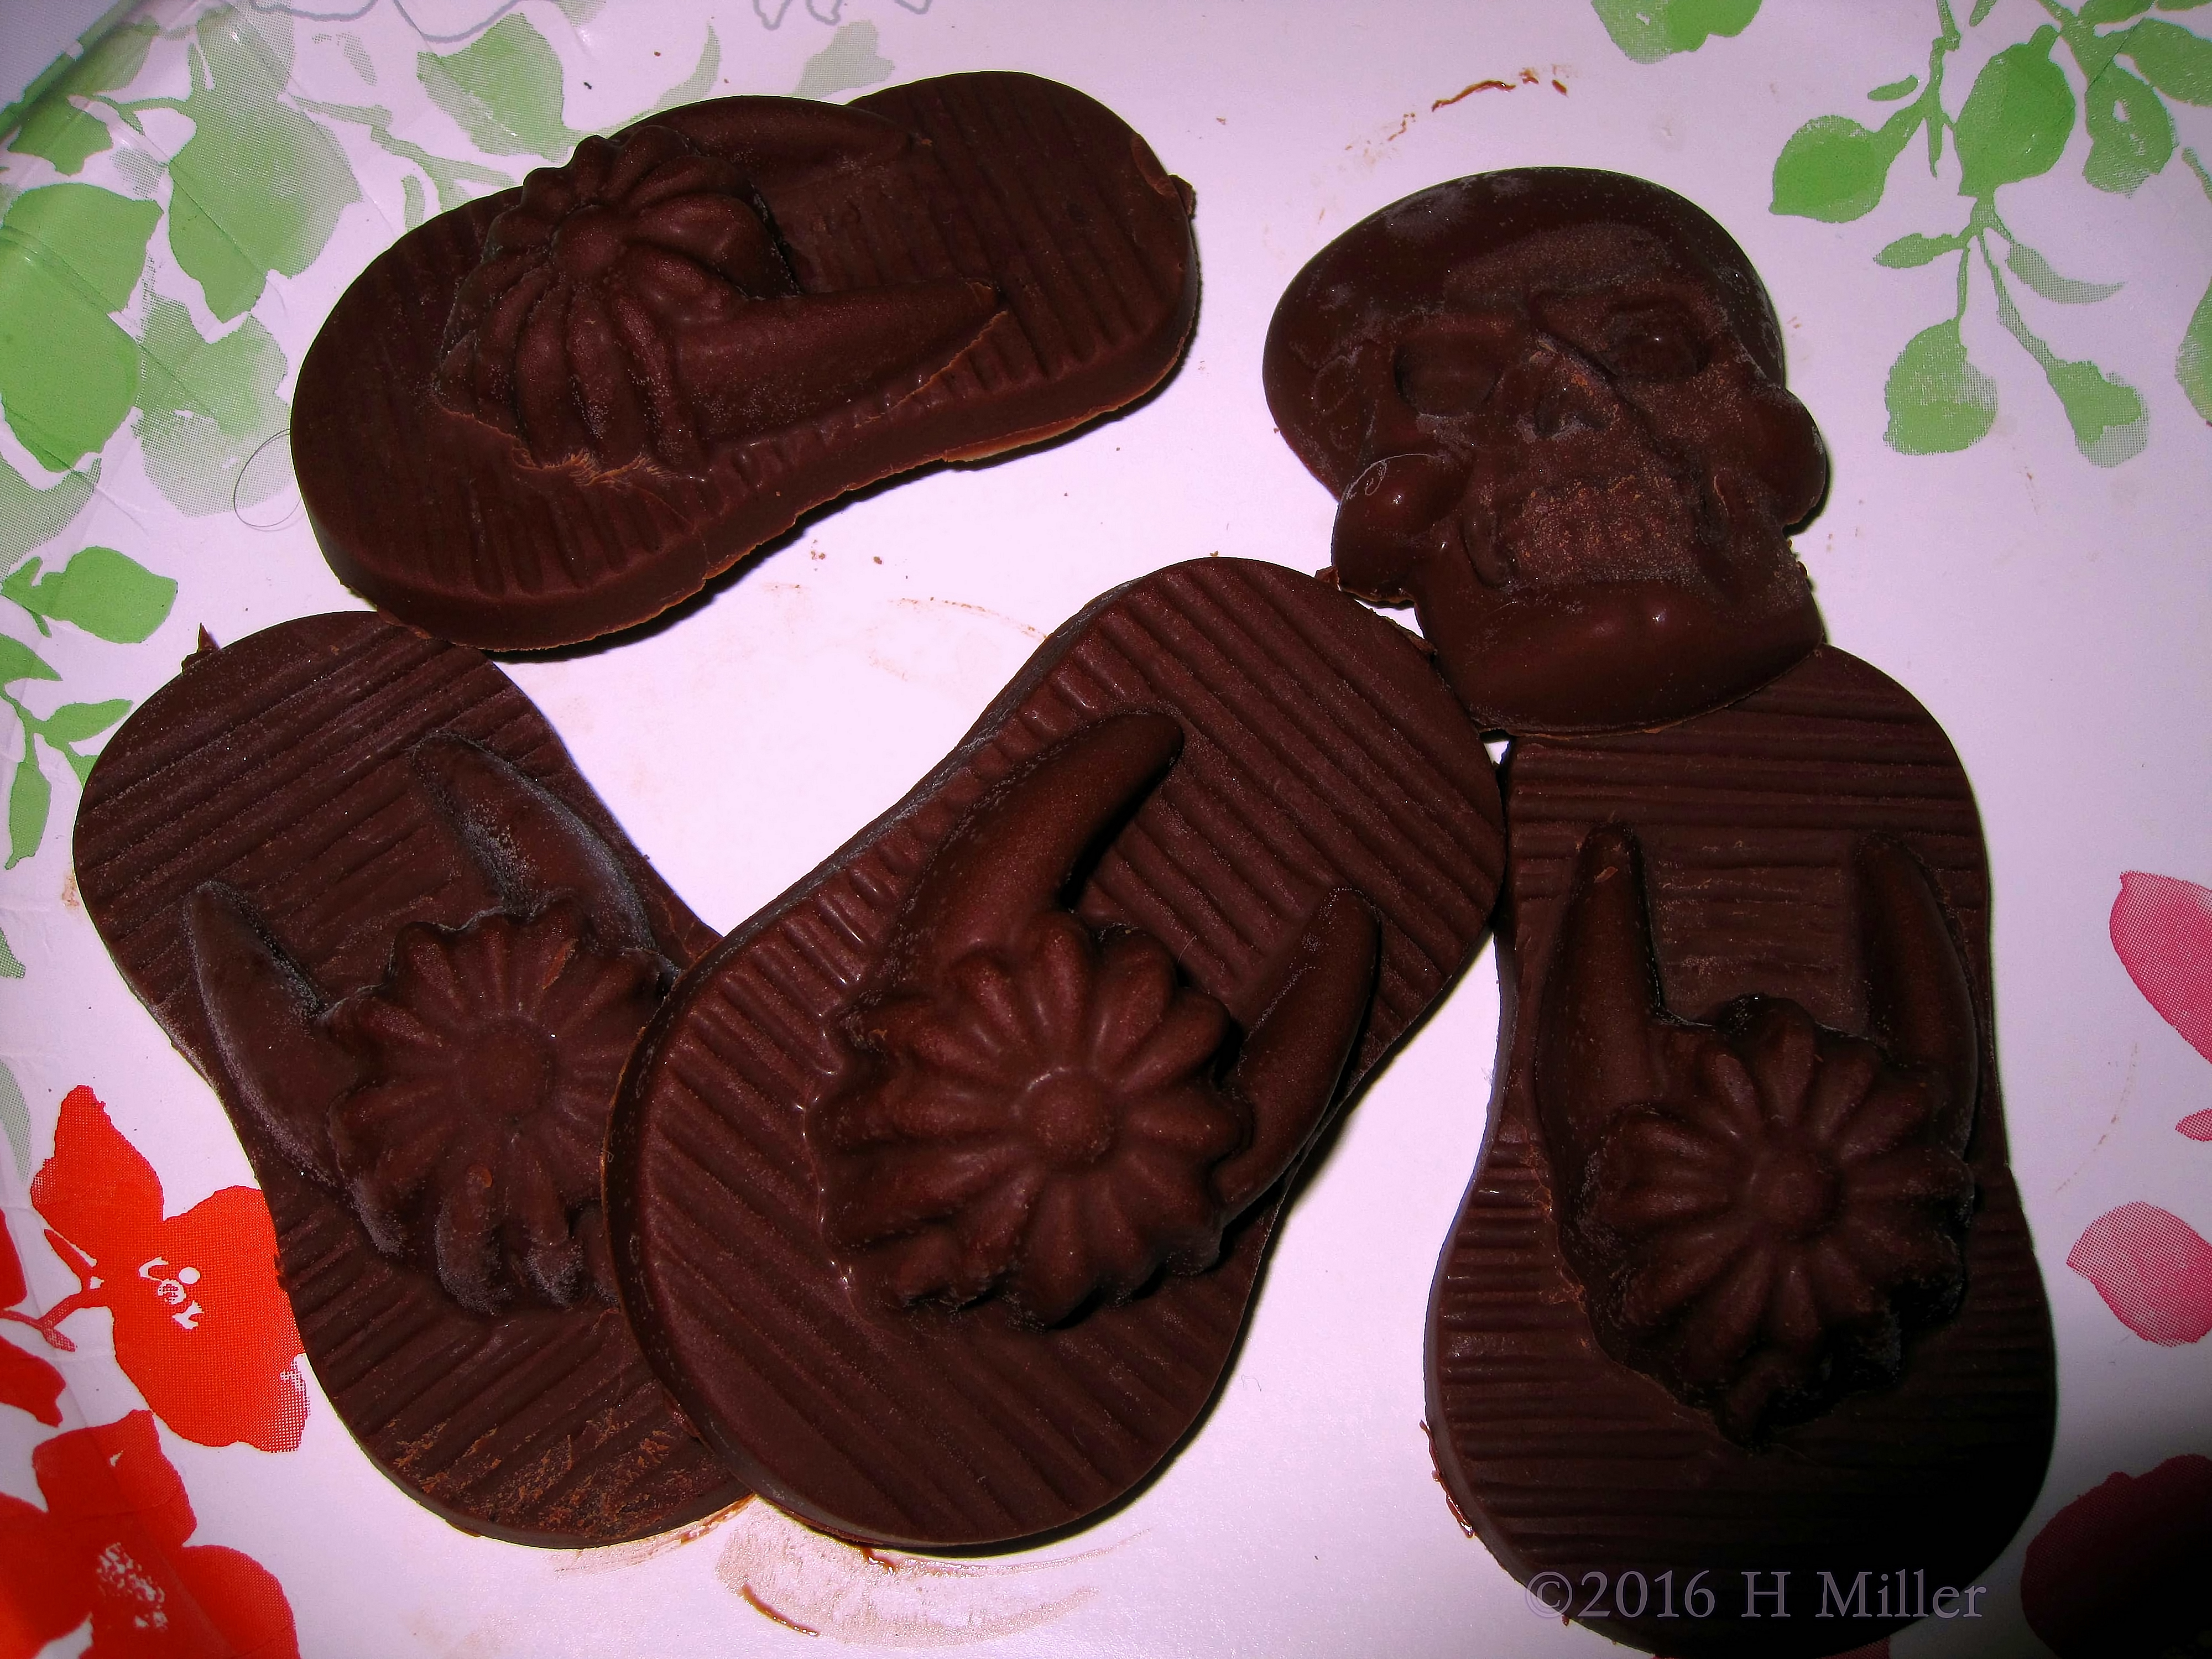 Fun Chocolate Molds From The Fountain. 